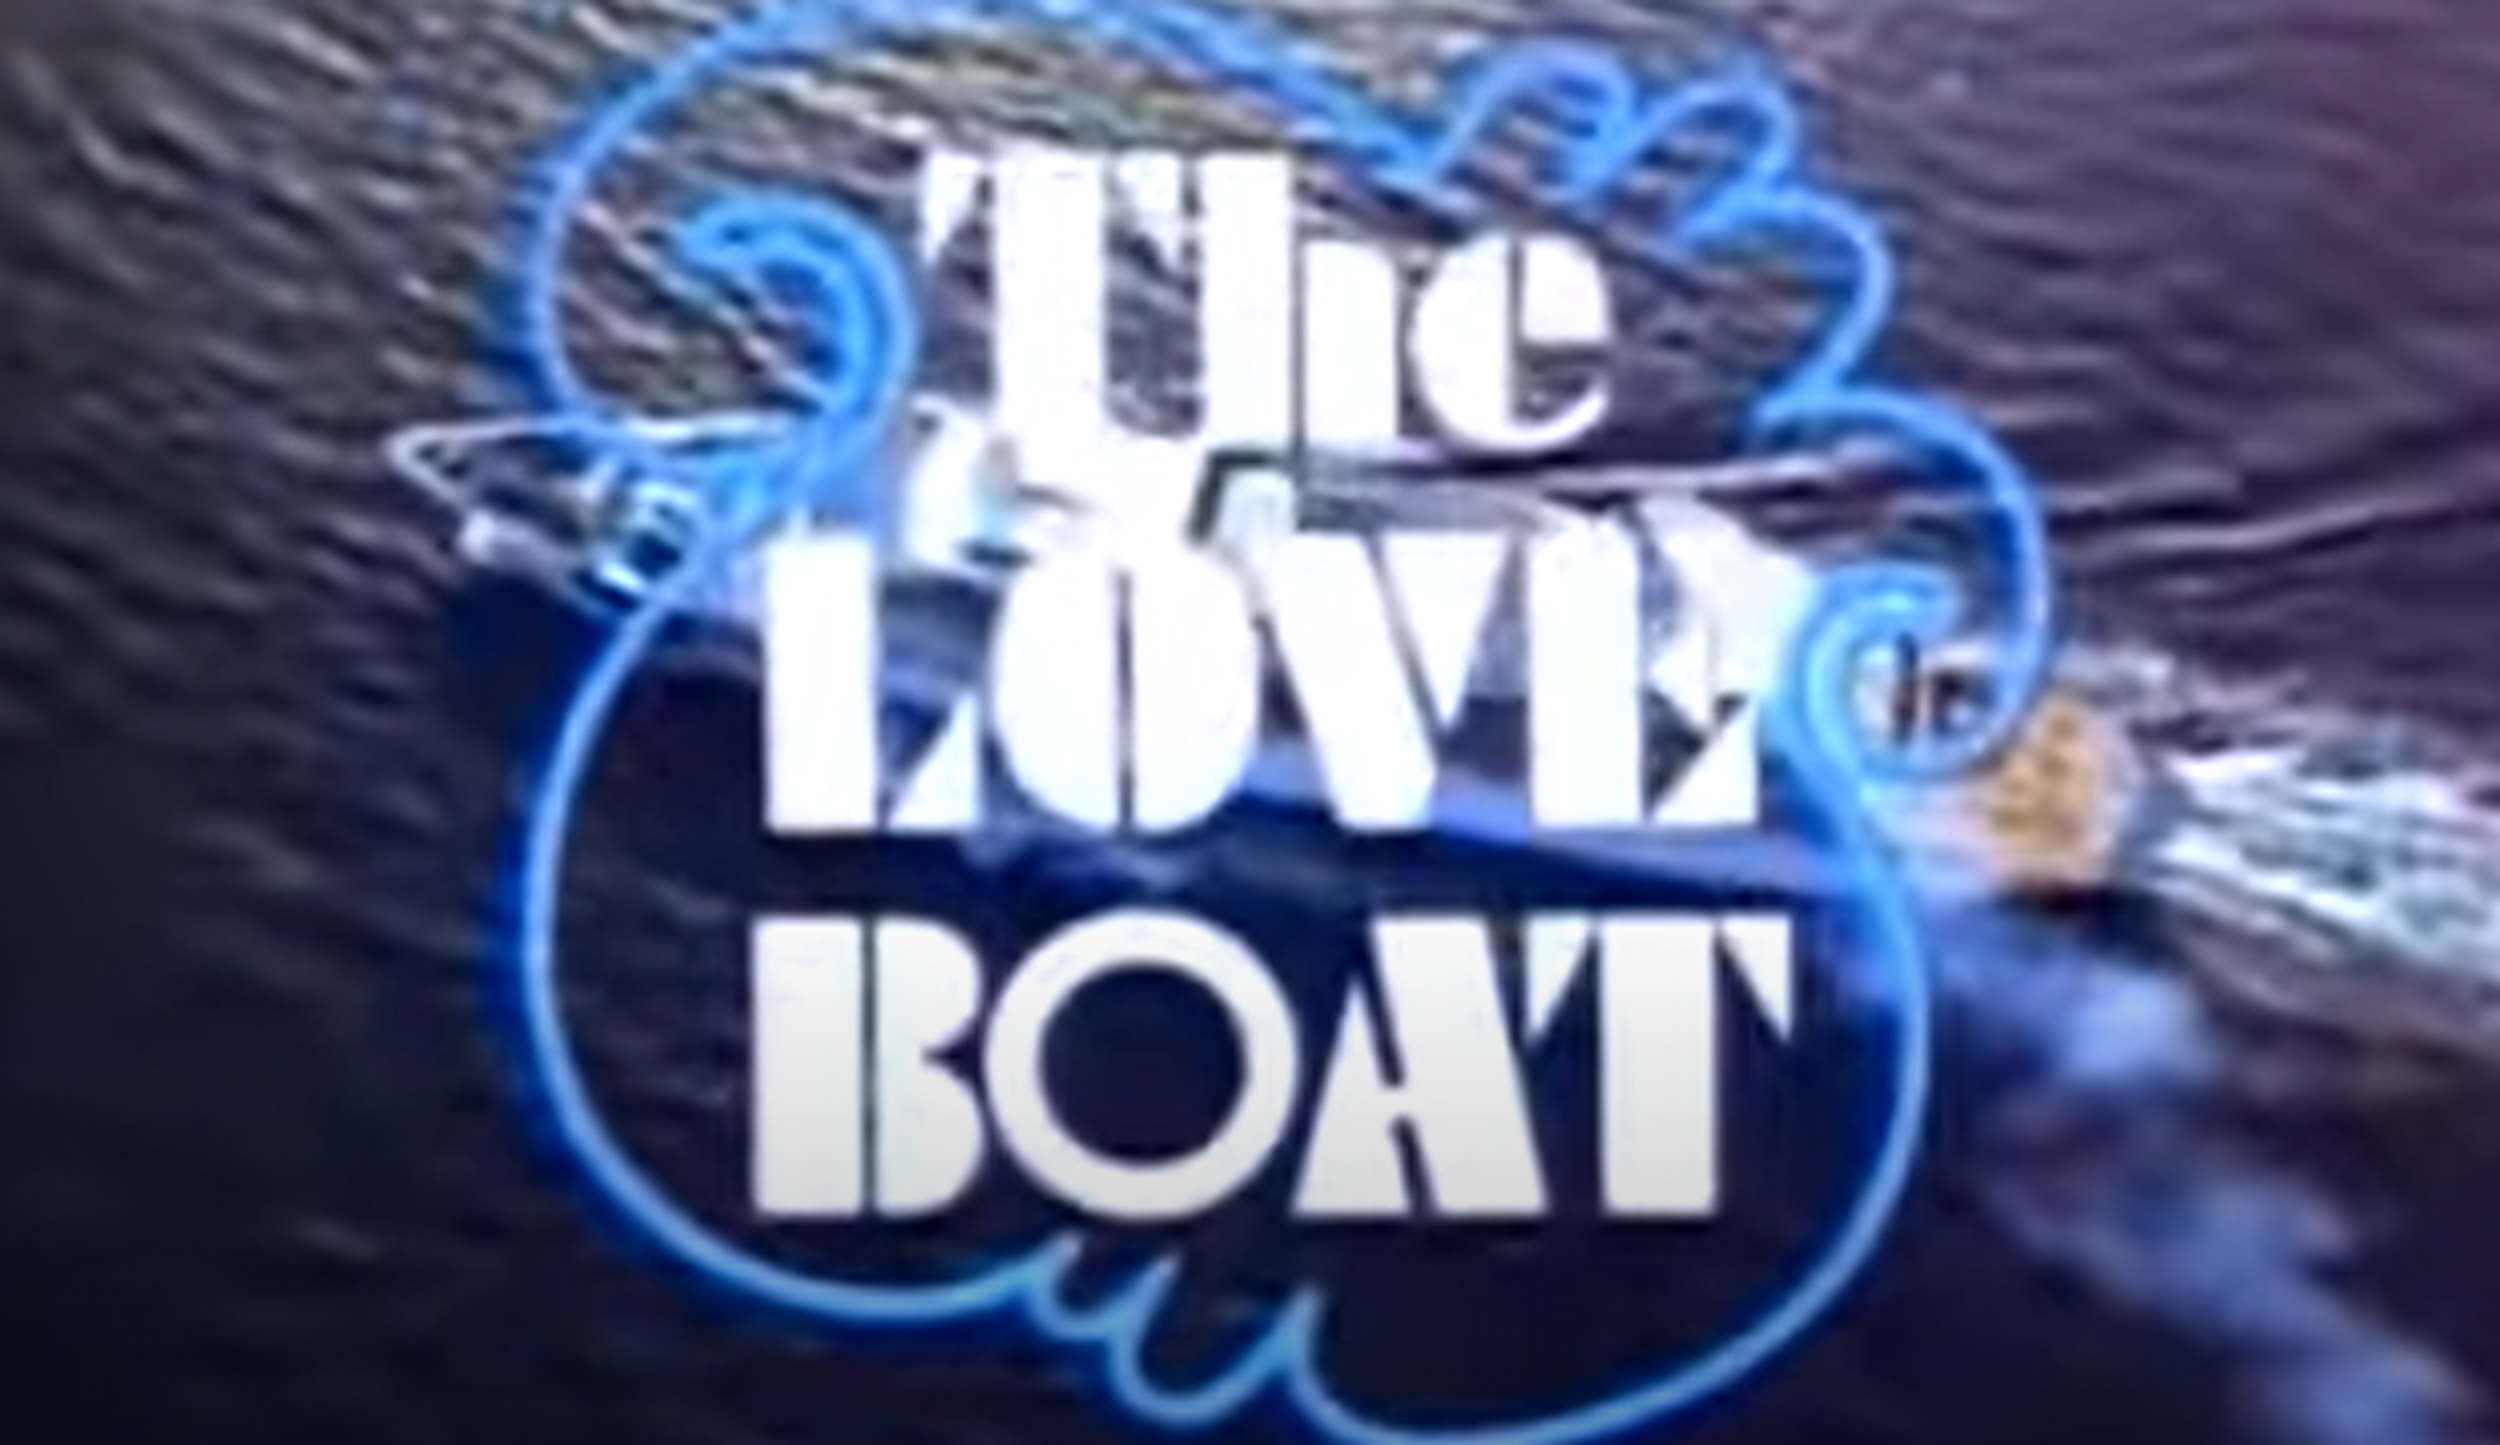 <p>Let's forget <em>Love Boat: The Next Wave </em>from the late 1990s. Though, we love the late Robert Urich. Cruising might be a little dicey in the age of COVID-19, but in a fictional world, where say, Julie McCoy's daughter is a cruise director like her mother and Vicki Stubing is captaining the updated and improved Pacific Princess. <a href="https://www.youtube.com/watch?v=bv-gFk6r9QU"> Isaac</a> (Ted Lange) needs to be involved, perhaps on "Celebrity Bartender Night" on the Promenade Deck.</p><p>You may also like: <a href='https://www.yardbarker.com/entertainment/articles/20_facts_you_might_not_know_about_jaws/s1__35148047'>20 facts you might not know about Jaws</a></p>